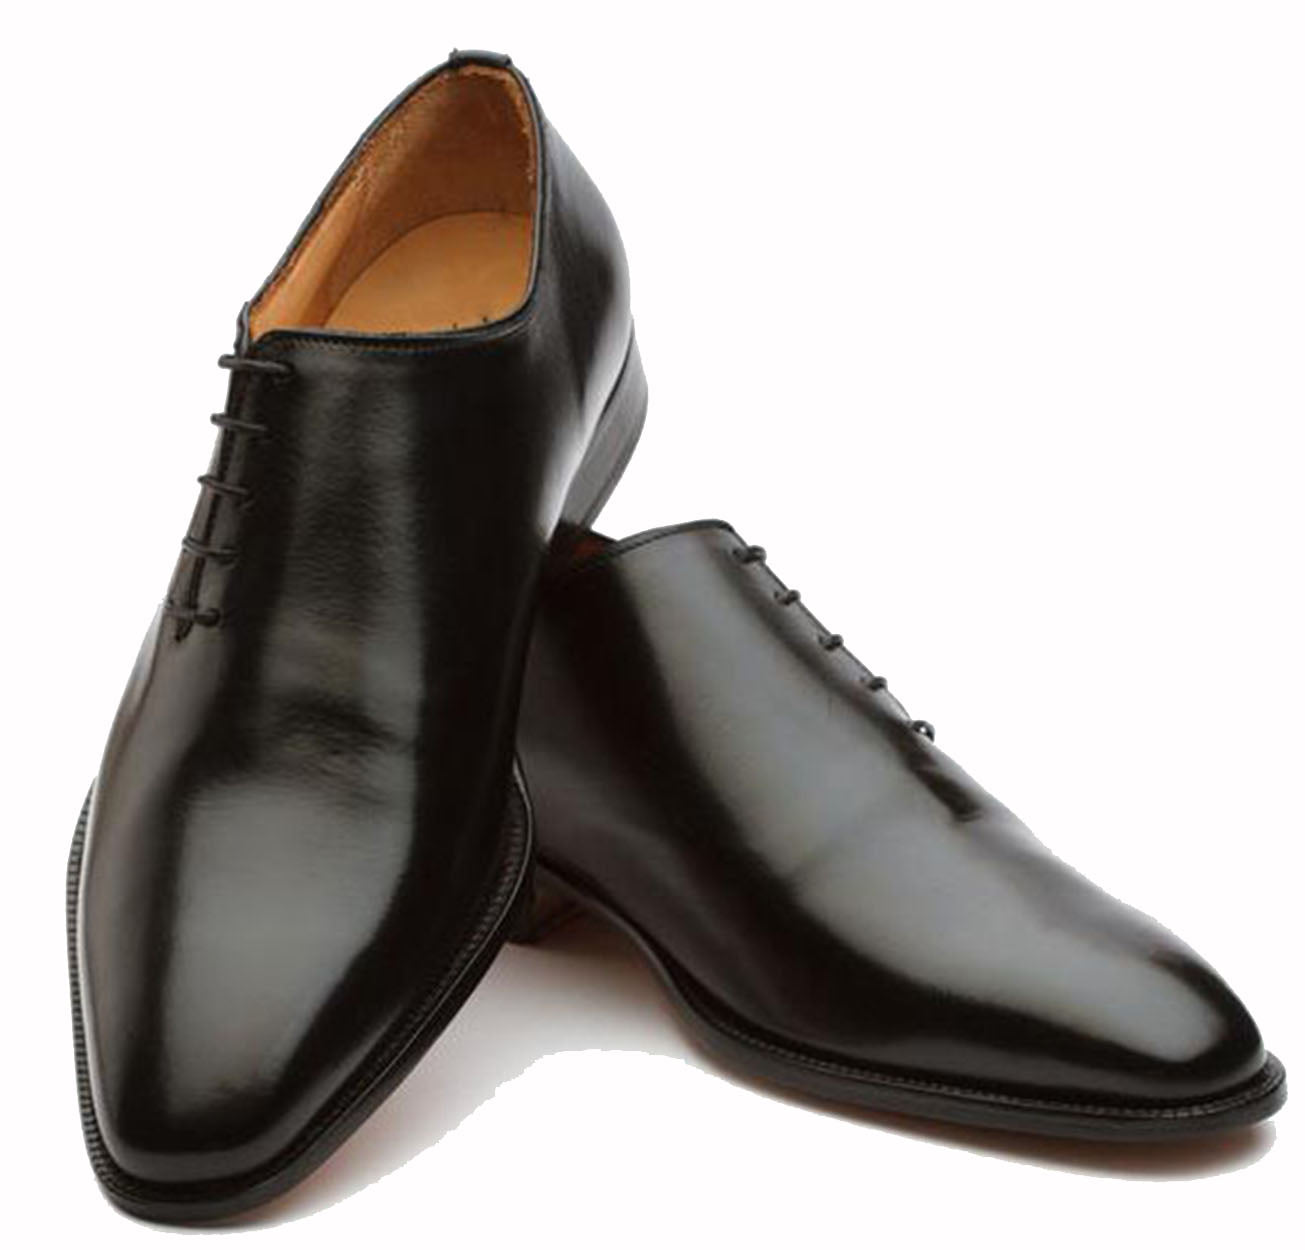 Black Leather Formal Wholecut Oxford Lace Up Shoes for Men with Leather Sole. Goodyear Welted Construction Available.